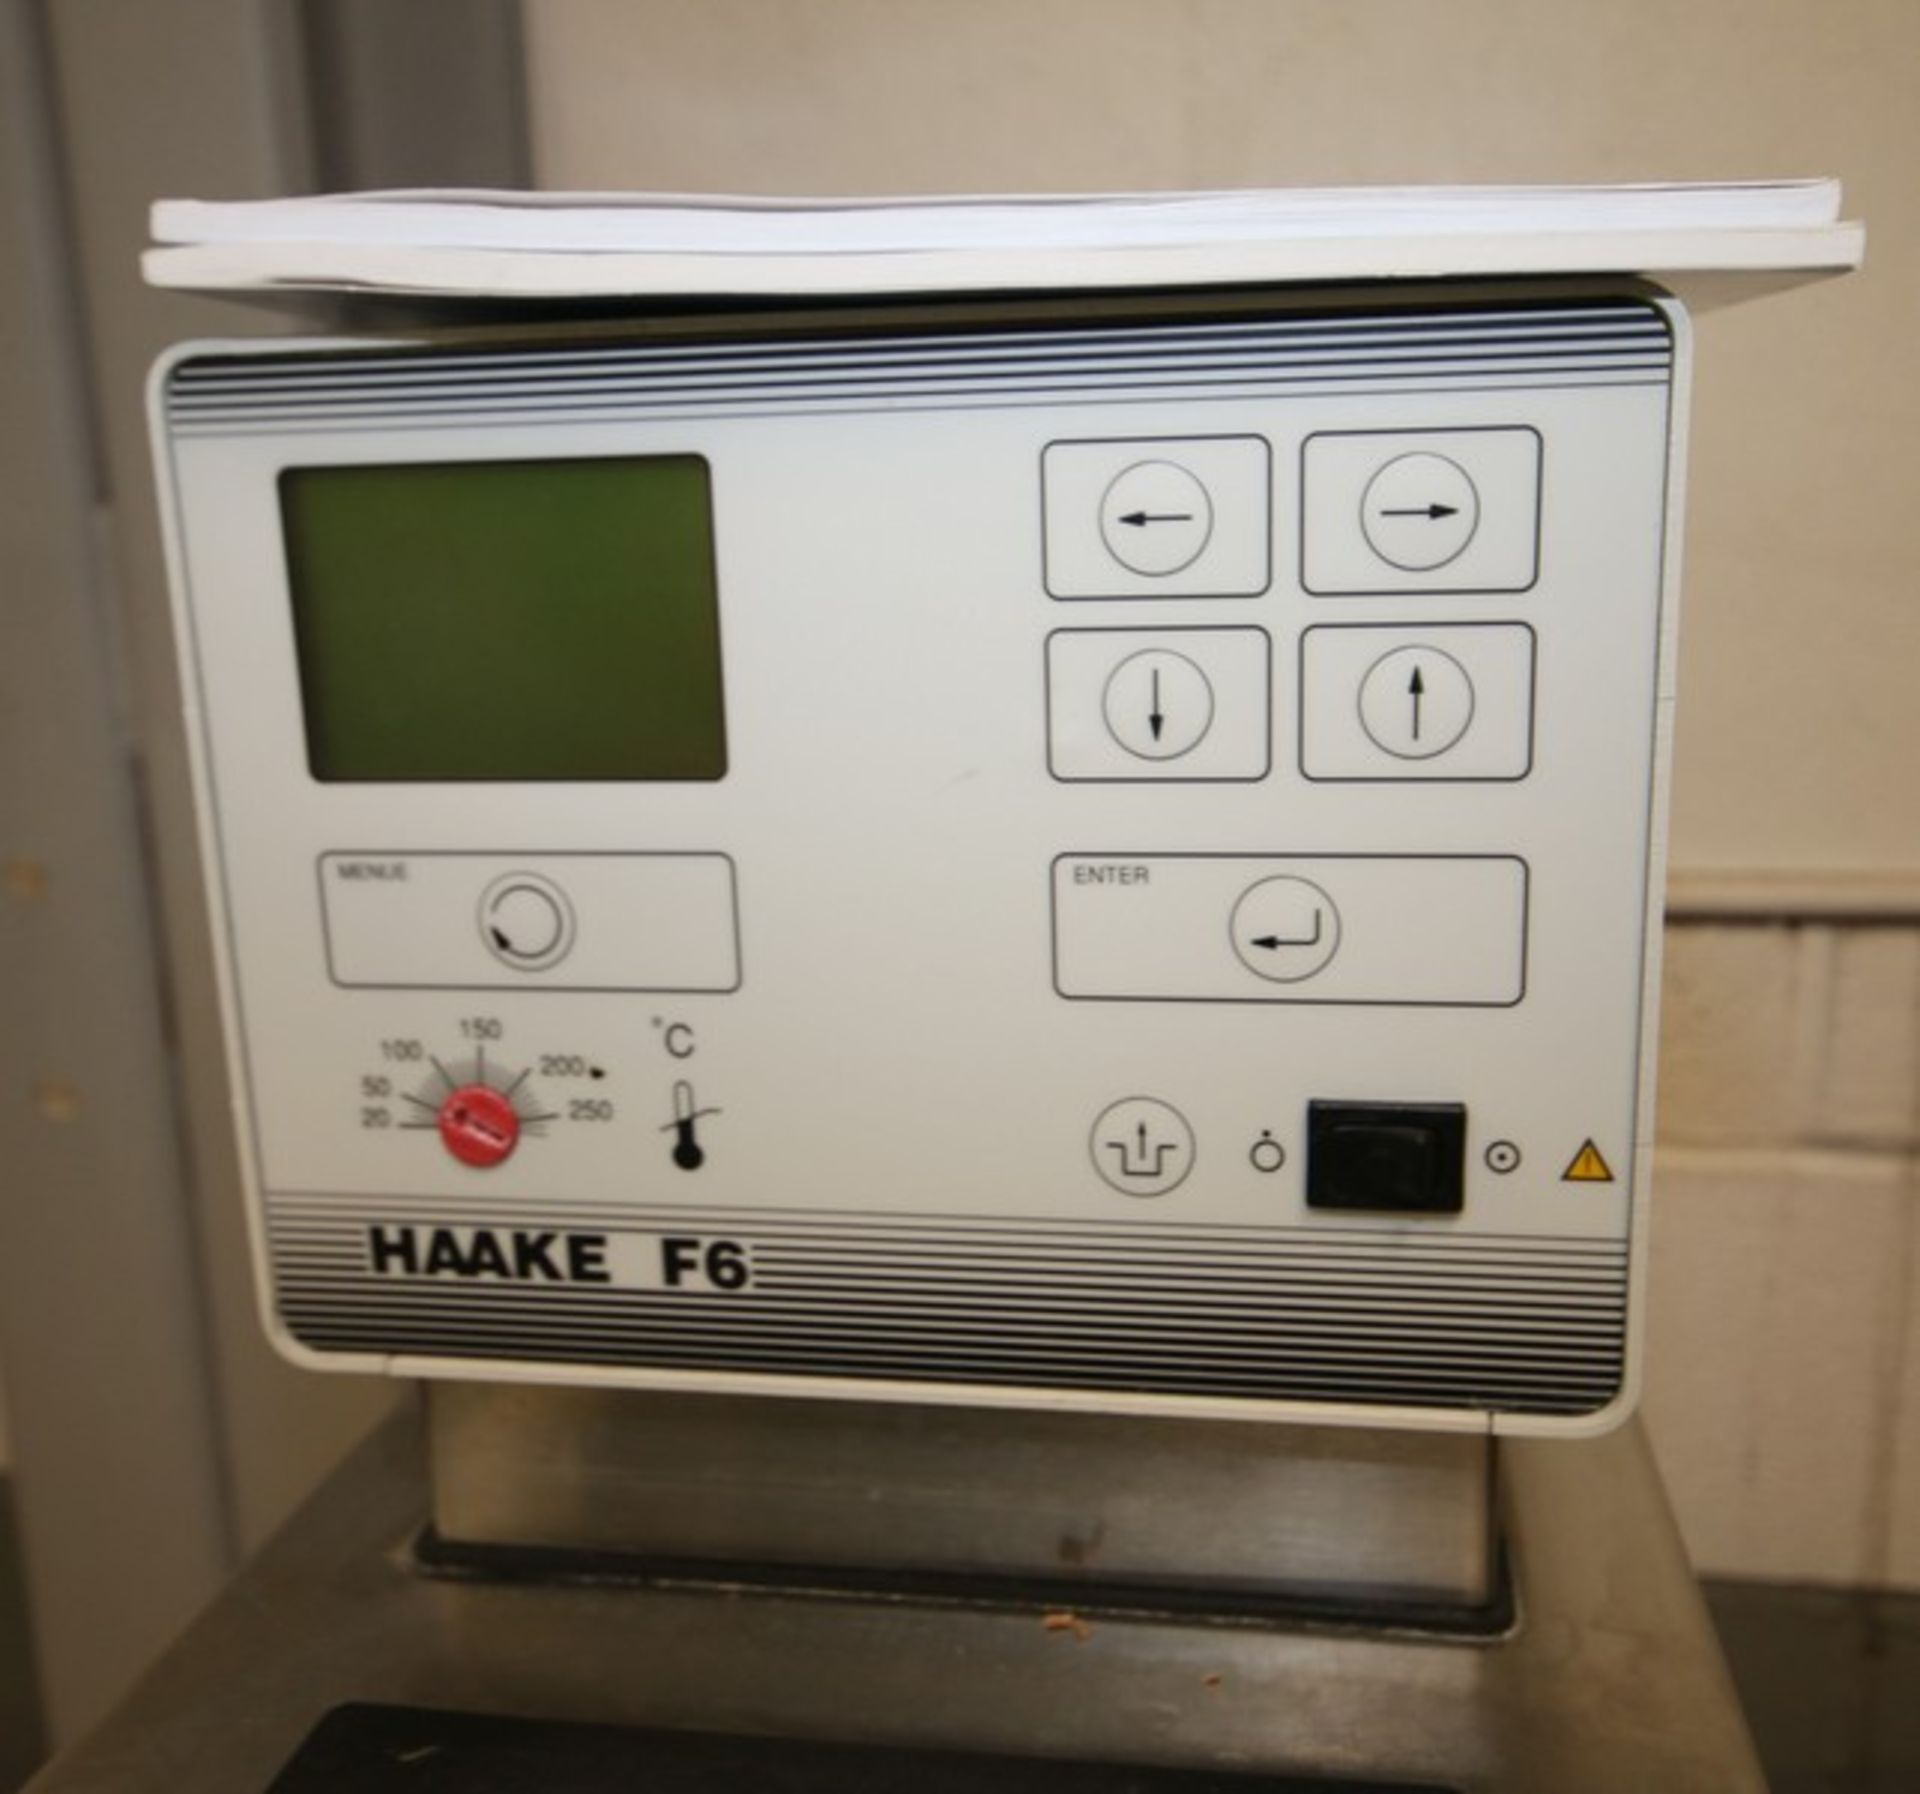 Haake F6 Circulator with C25 Circulating Water Bath, Type 002-9838, SN 197003780/003, 115V, with - Image 2 of 5